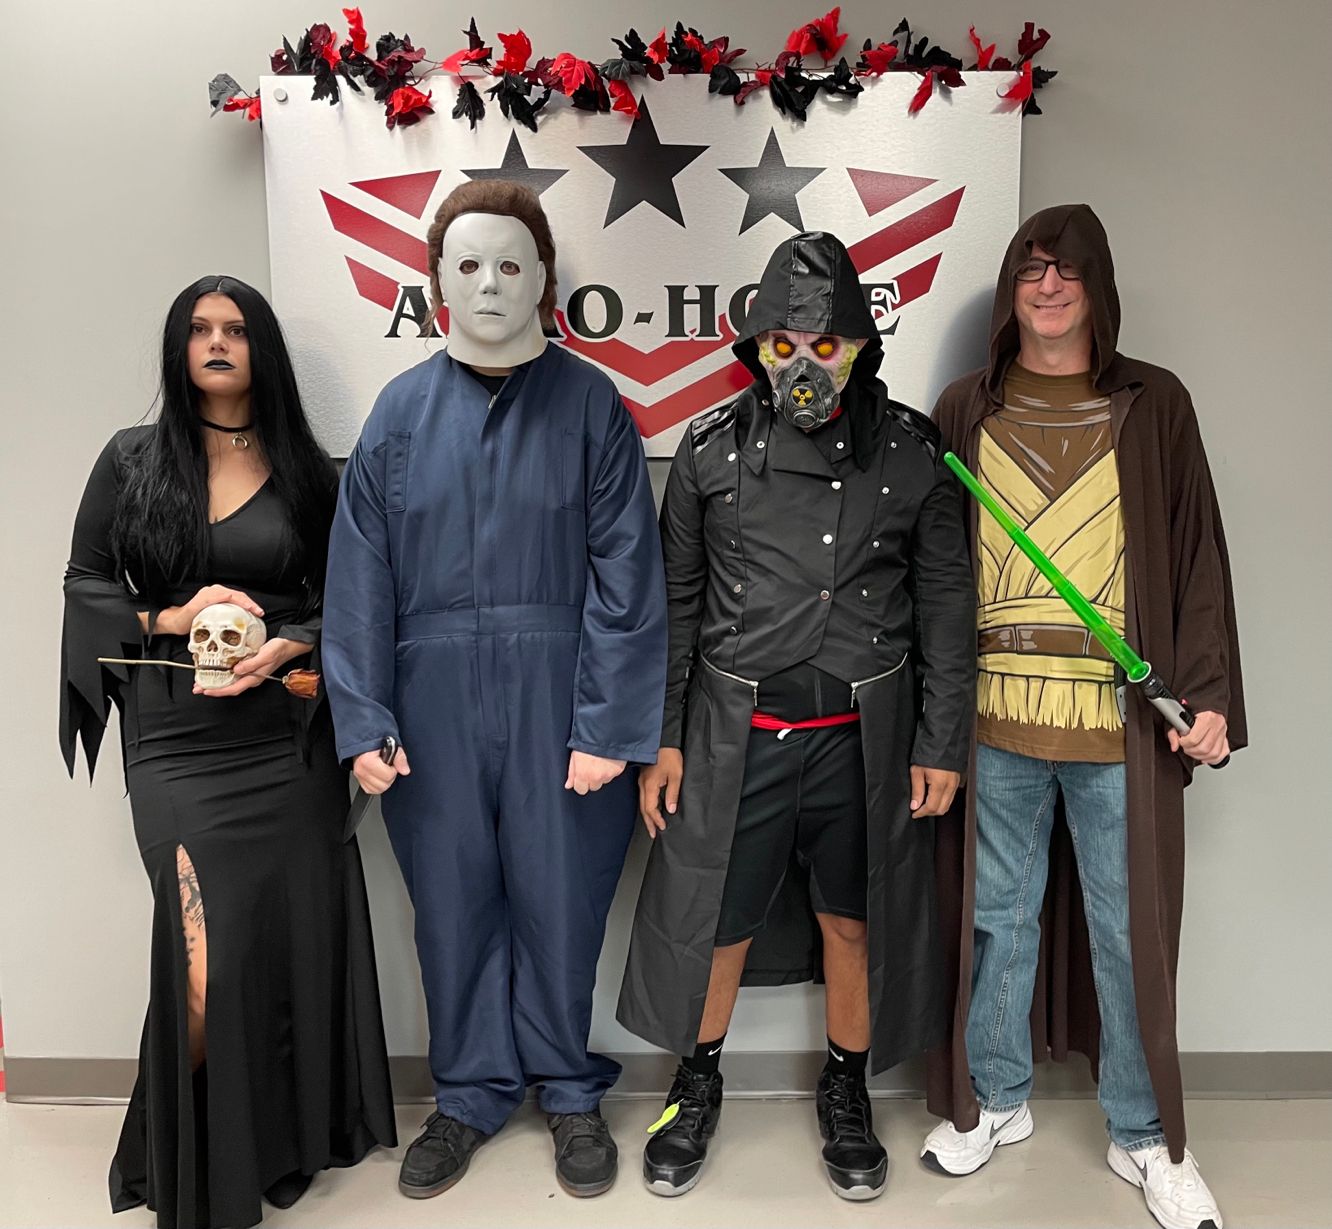 four people in halloween costumes posing in front of an auto draft banner, featuring characters like morticia addams, michael myers, a cyberpunk fighter, and a jedi.